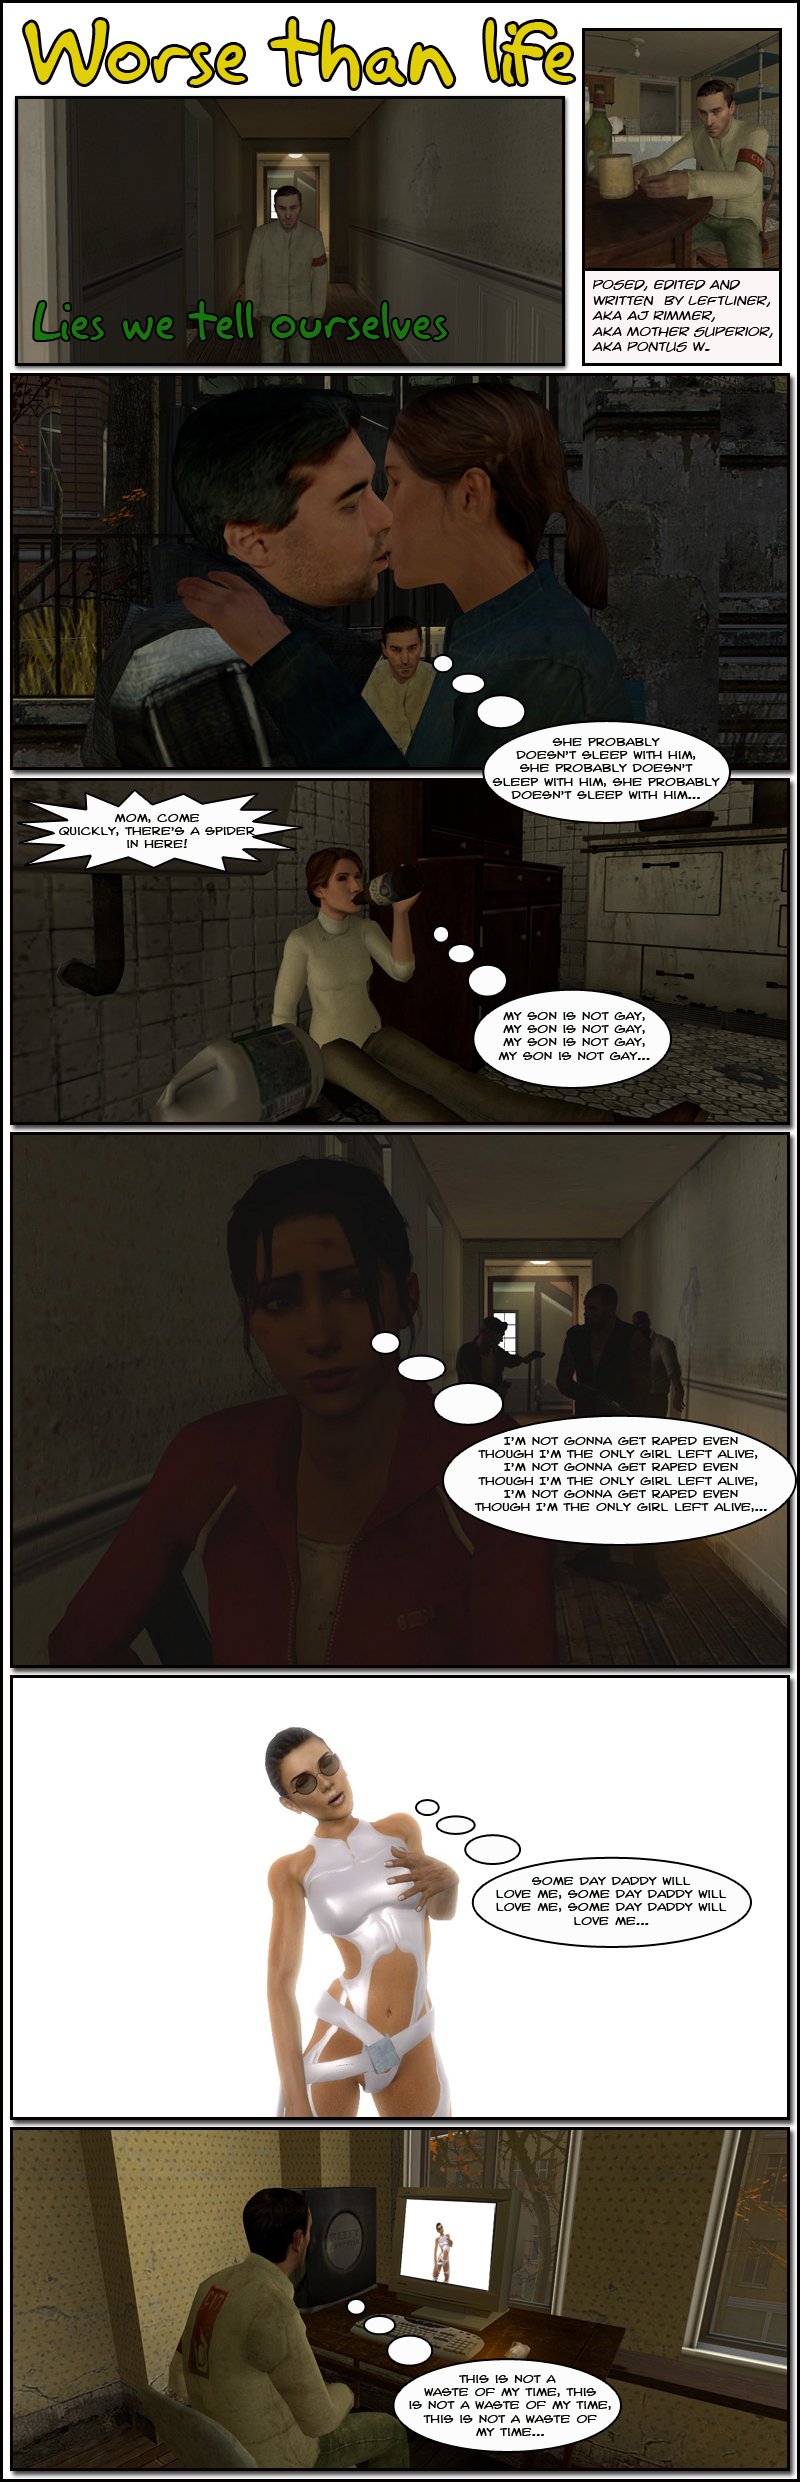 AJ Rimmer watches as a girl and a guy kiss and thinks to himself repeatedly that she probably doesn't sleep with him. At the apartment, as Rimmer screams to his mom to come quickly because there's a spider, she thinks repeatedly that her son is not gay. Left 4 Dead's Zoey, a little farther ahead from Bill, Louis and Francis, thinks to herself repeatedly that she isn't going to get raped even though she's the only girl left alive. An attractive woman in a stark white bodysuit with straps thinks to herself repeatedly that some day Daddy will love her. At this apartment, watching the woman in white on his computer screen with a hand in his pants, Rimmer thinks to himself repeatedly that this is not a waste of his time. The end.